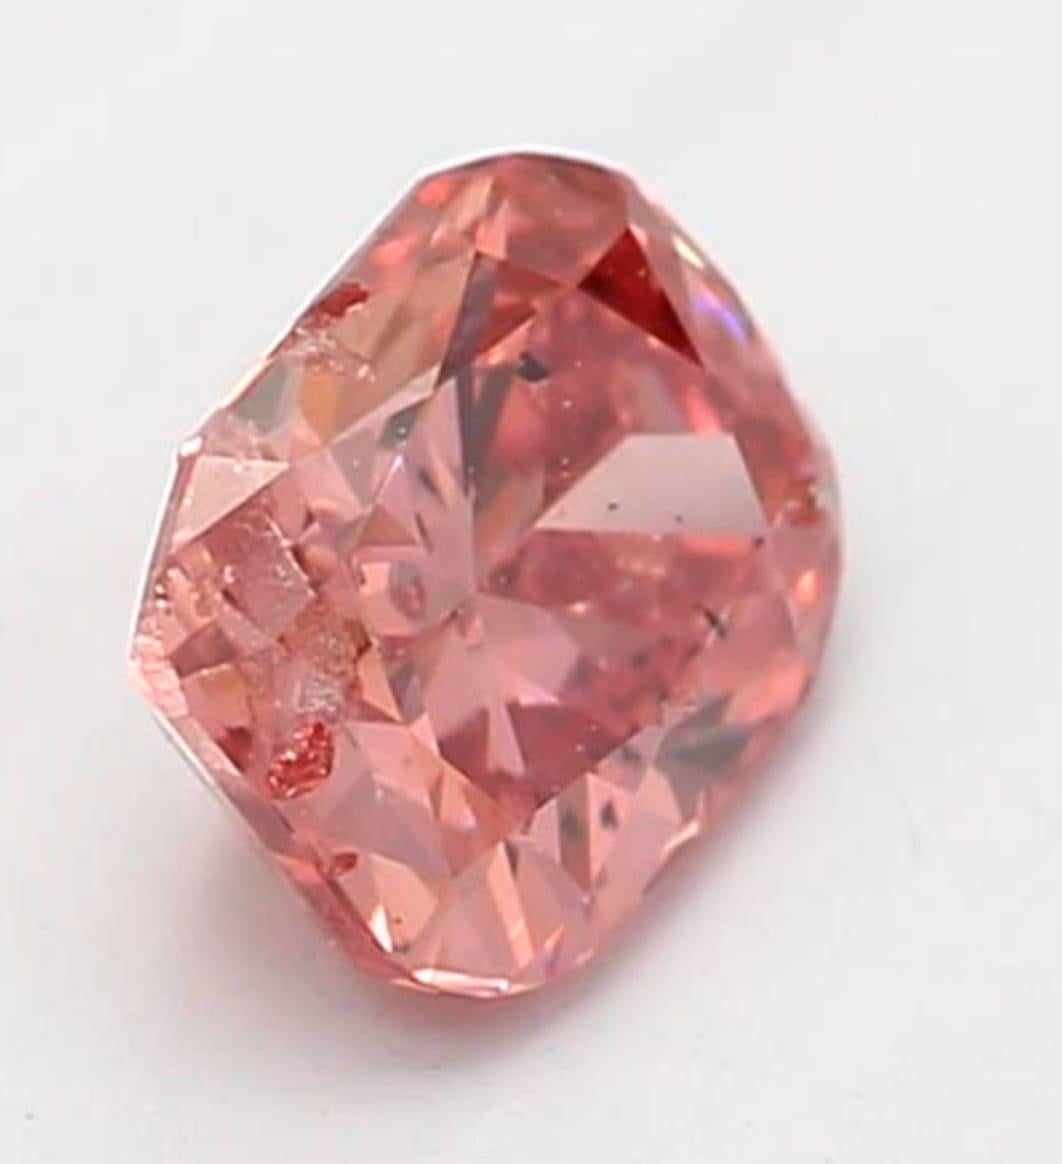 0.24 Carat Fancy Deep Orangy Pink Round Cut Diamond GIA Certified For Sale 1